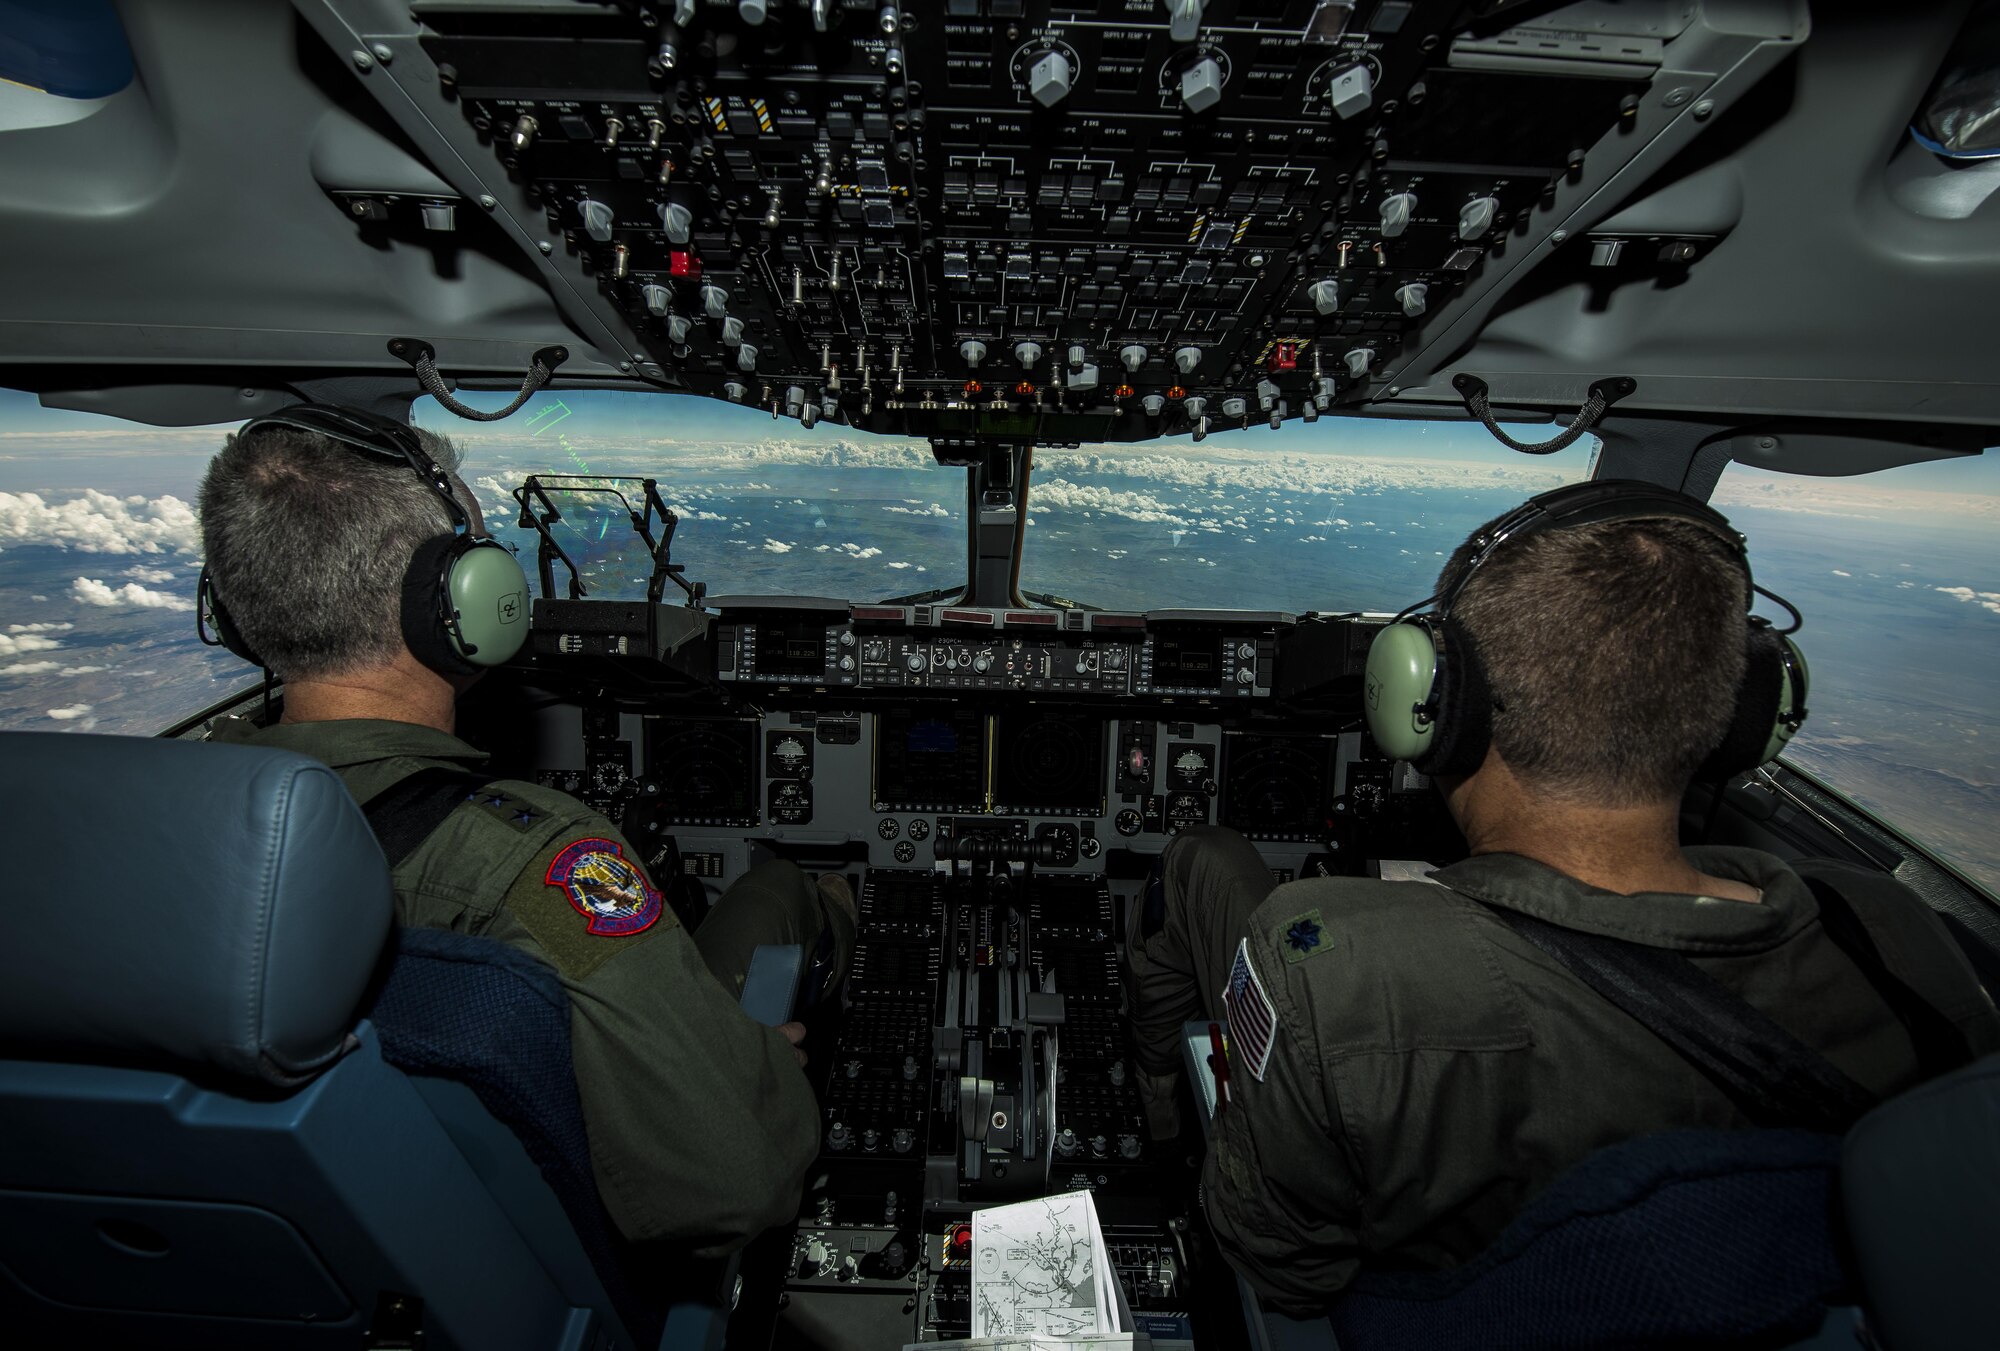 General Paul Selva, Air Mobility Command commander, takes control of C-17 Globemaster III, P-223, mid-flight during the inaugural flight of the final U.S. Air Force C-17 Sept. 12, 2013. Lt. Gen. James Jackson, Air Force Reserve commander, performed the take-off from California and Lt. Gen. Stanley Clarke, Air National Guard director, landed the aircraft at Joint Base Charleston, S.C.